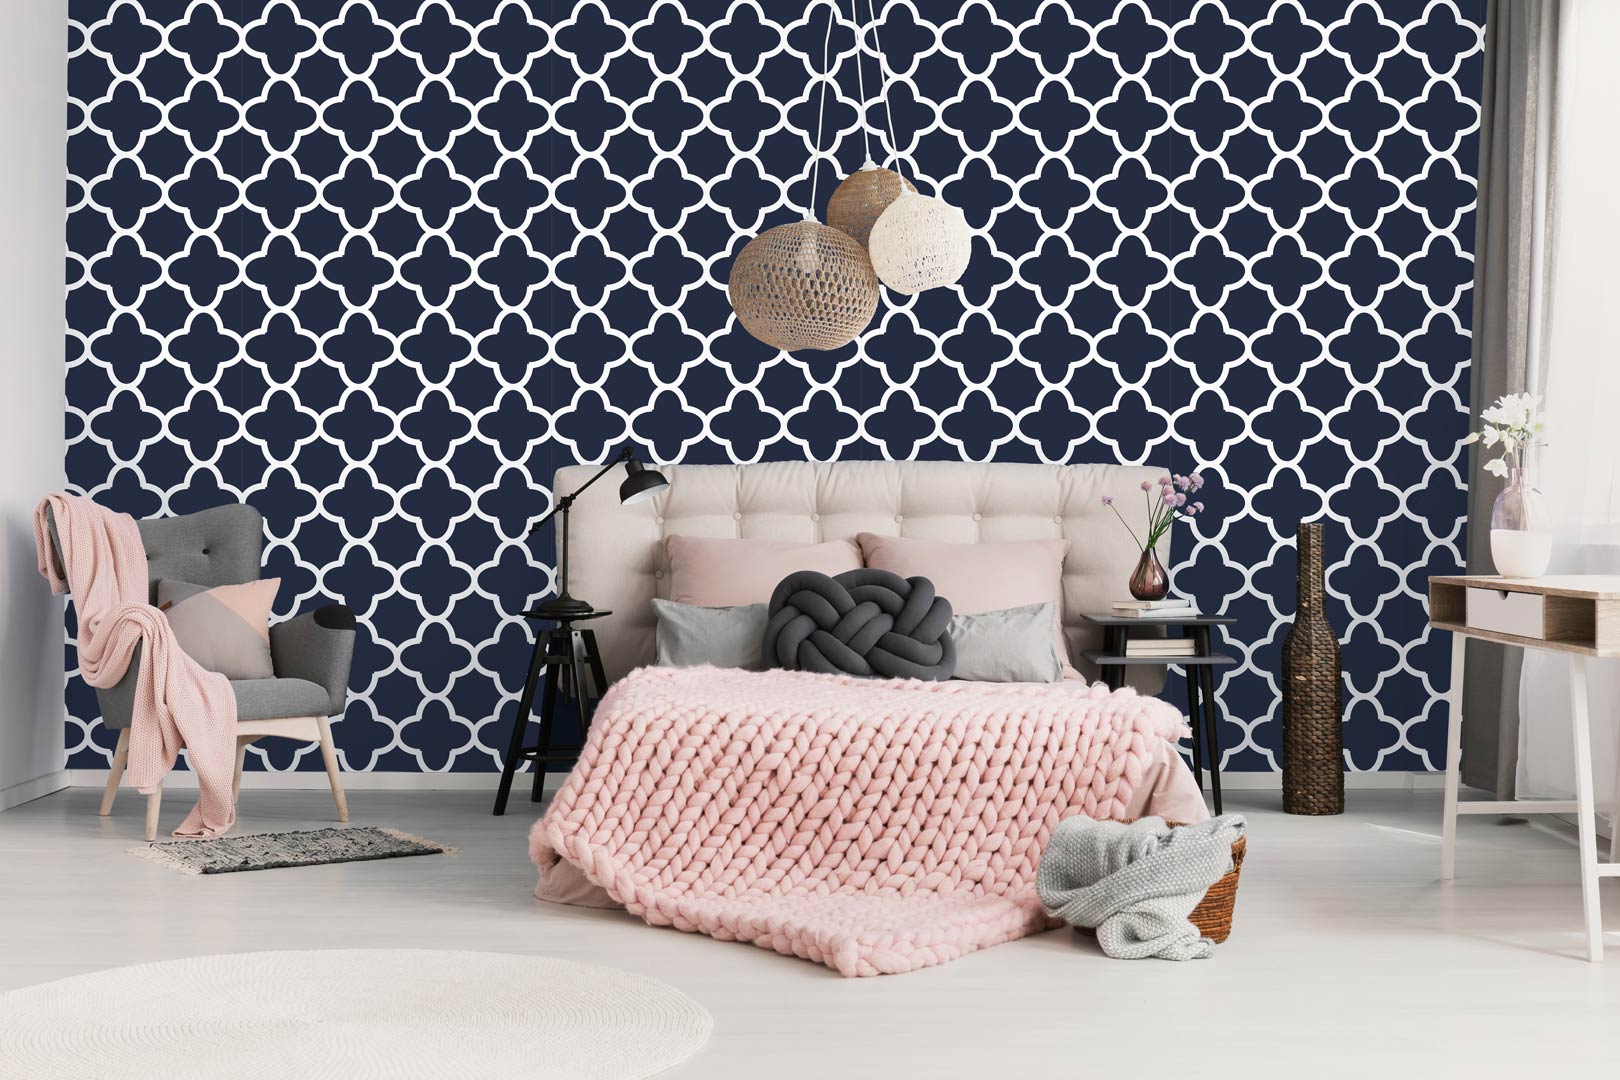 Navy blue and white patterned wallpaper in Moroccan style - Dekoori image 2